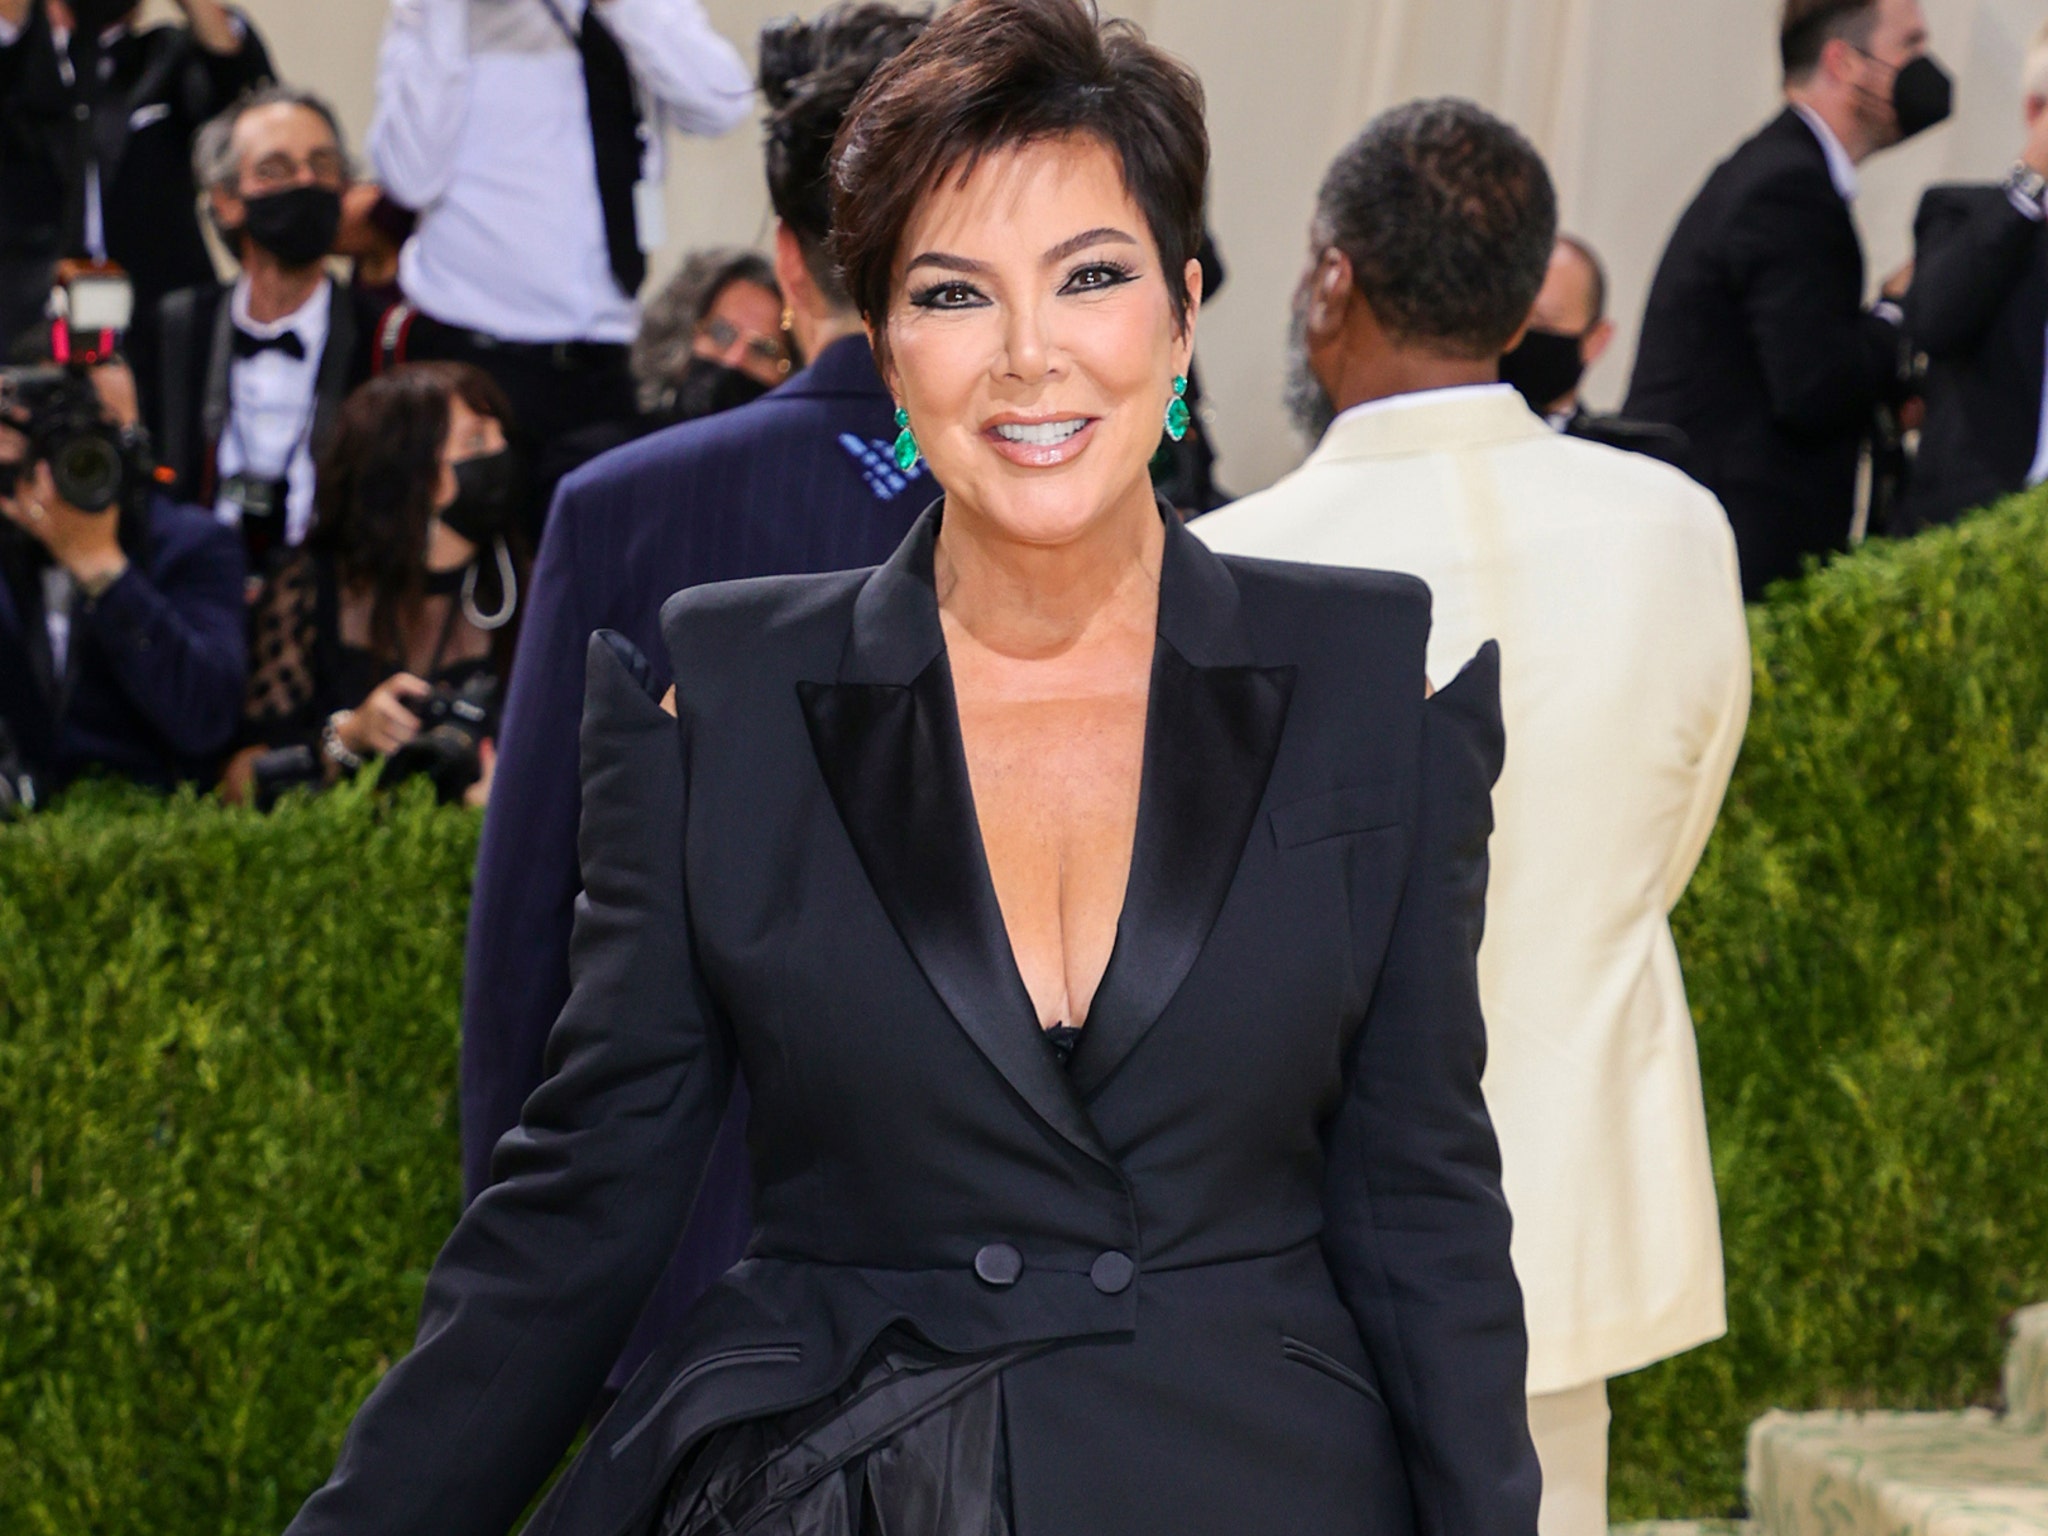 Kris Jenner Has an Entire Room Dedicated to Her Dishes